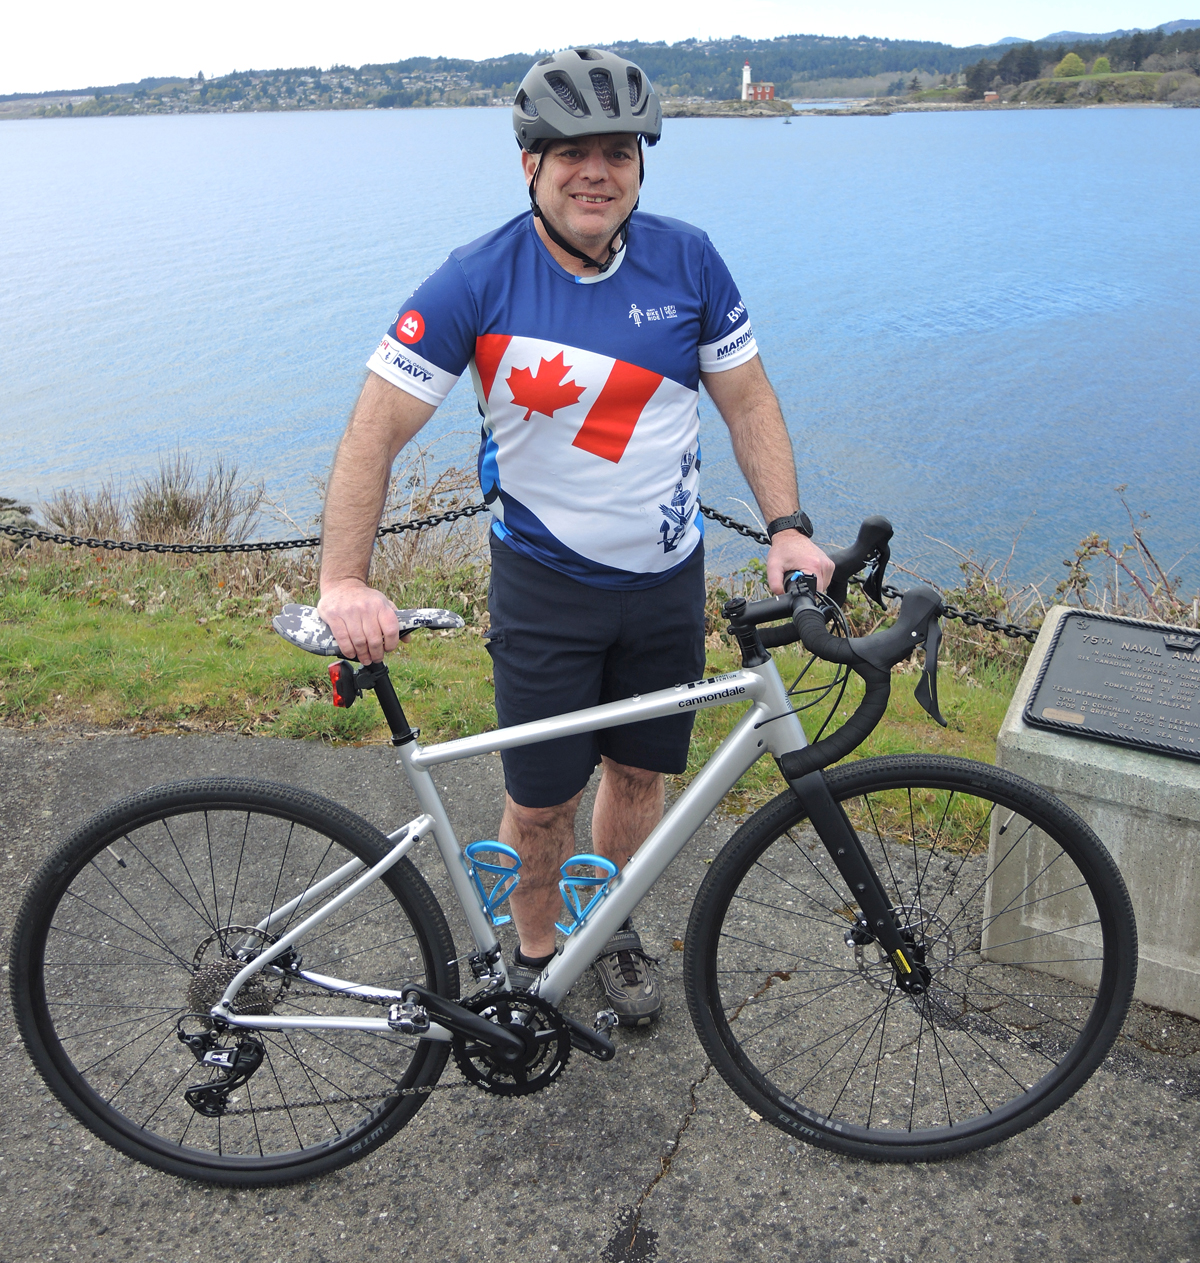 Chief Petty Officer 1st Class (CPO1) Paul Fenton of the Personnel Coordination Centre (Pacific) shows off his bike and cycling gear at Duntze Head, April 5. CPO1 Fenton is an ambassador for this year’s Navy Bike Ride, which takes place on May 25. Photo: Peter Mallett, Lookout